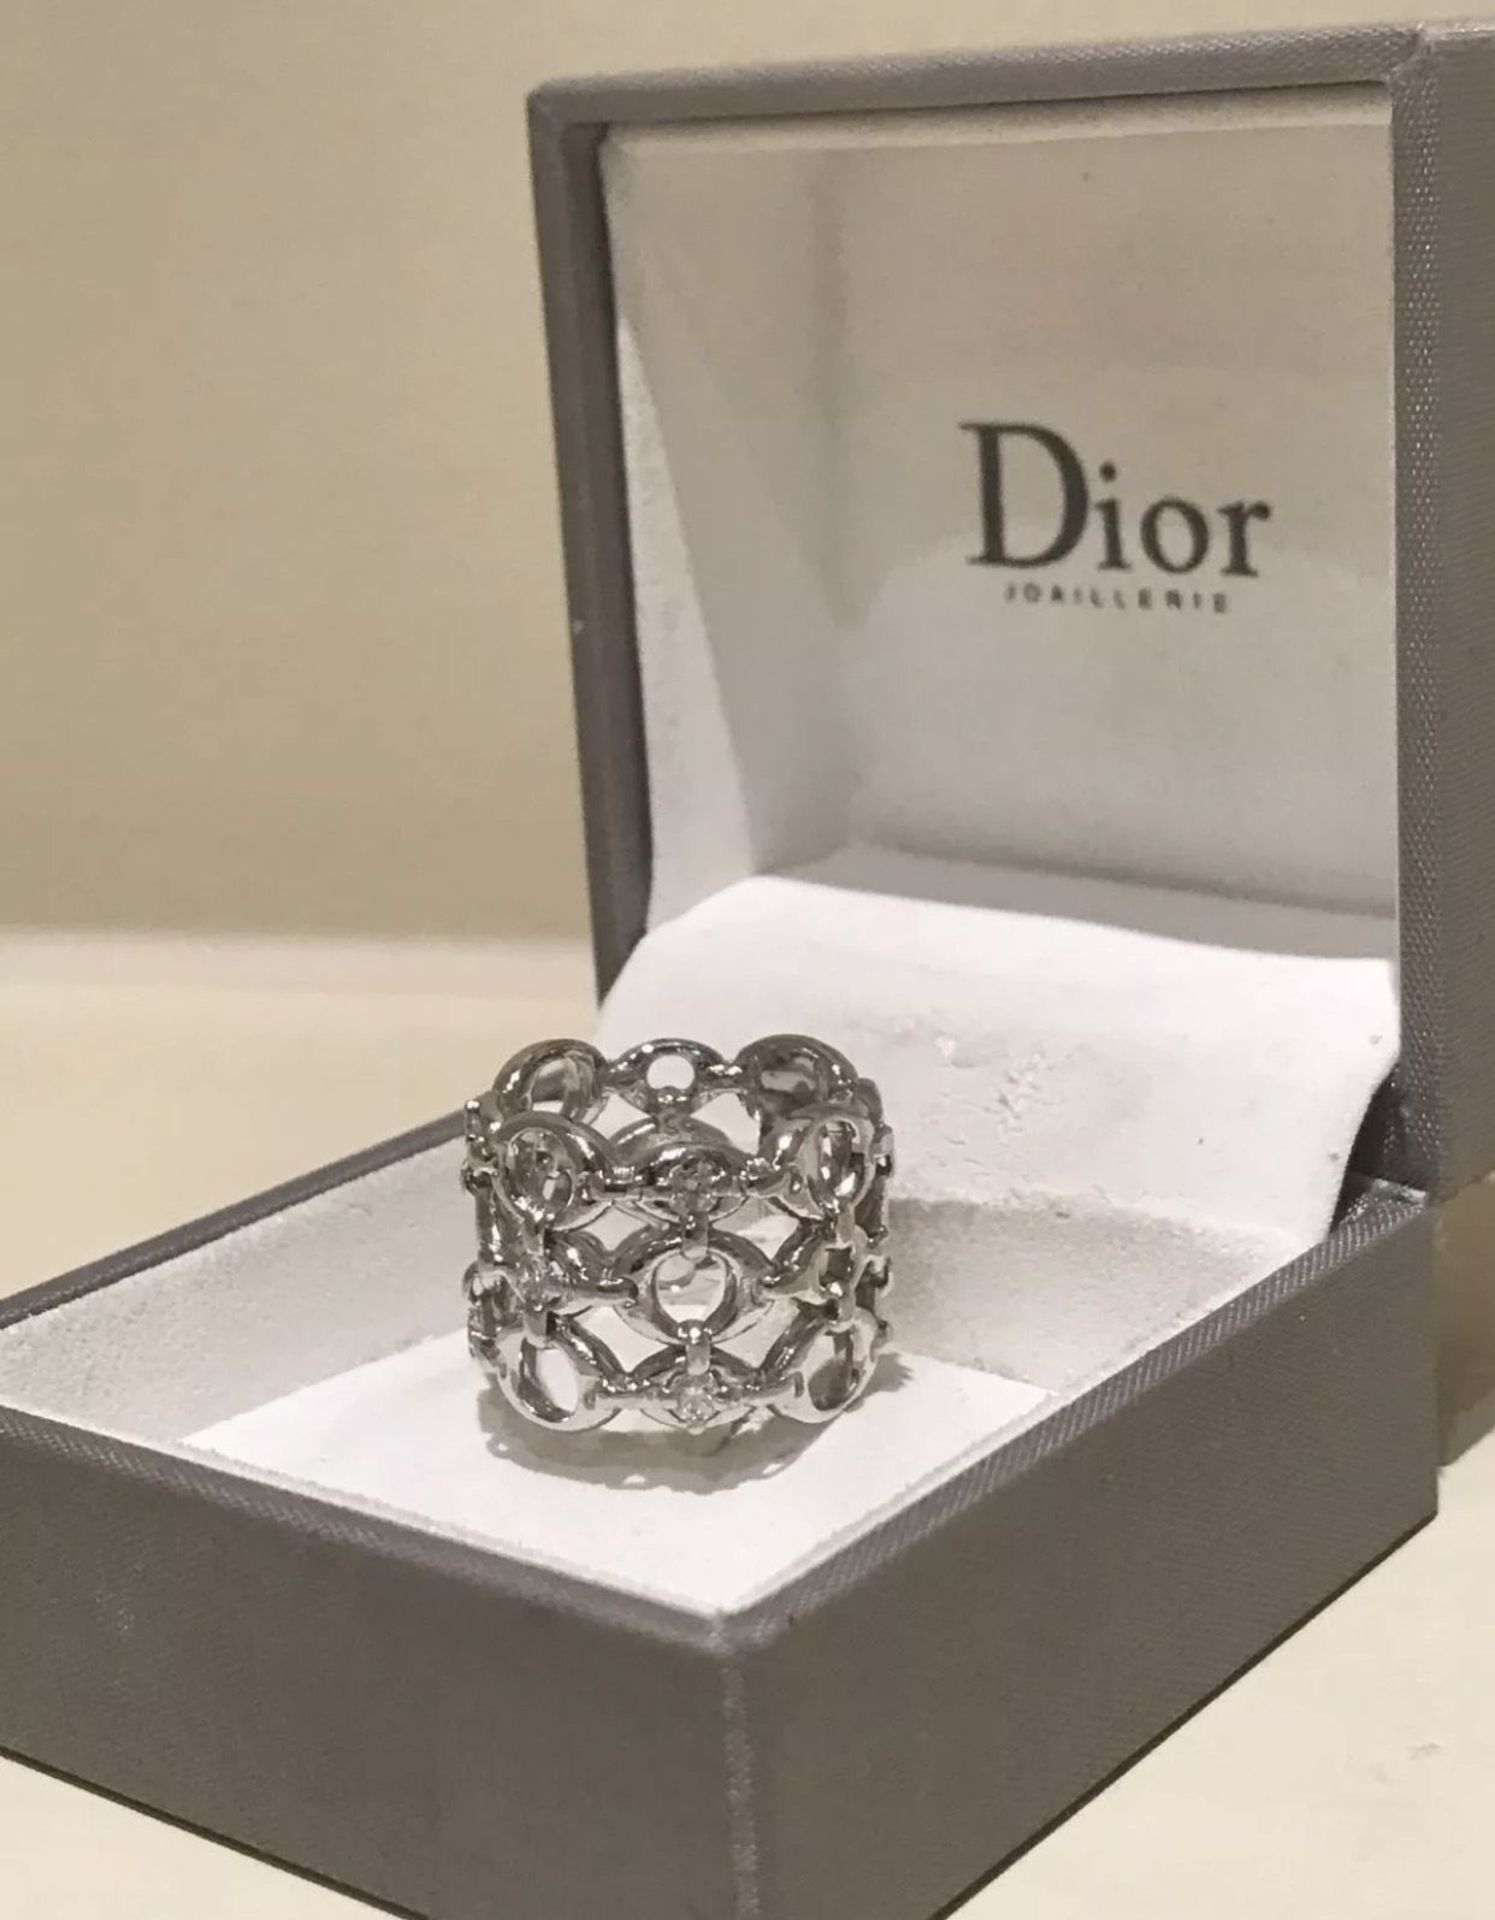 Christian Dior Diamond Ring set in 18 ct White Gold - Image 2 of 12